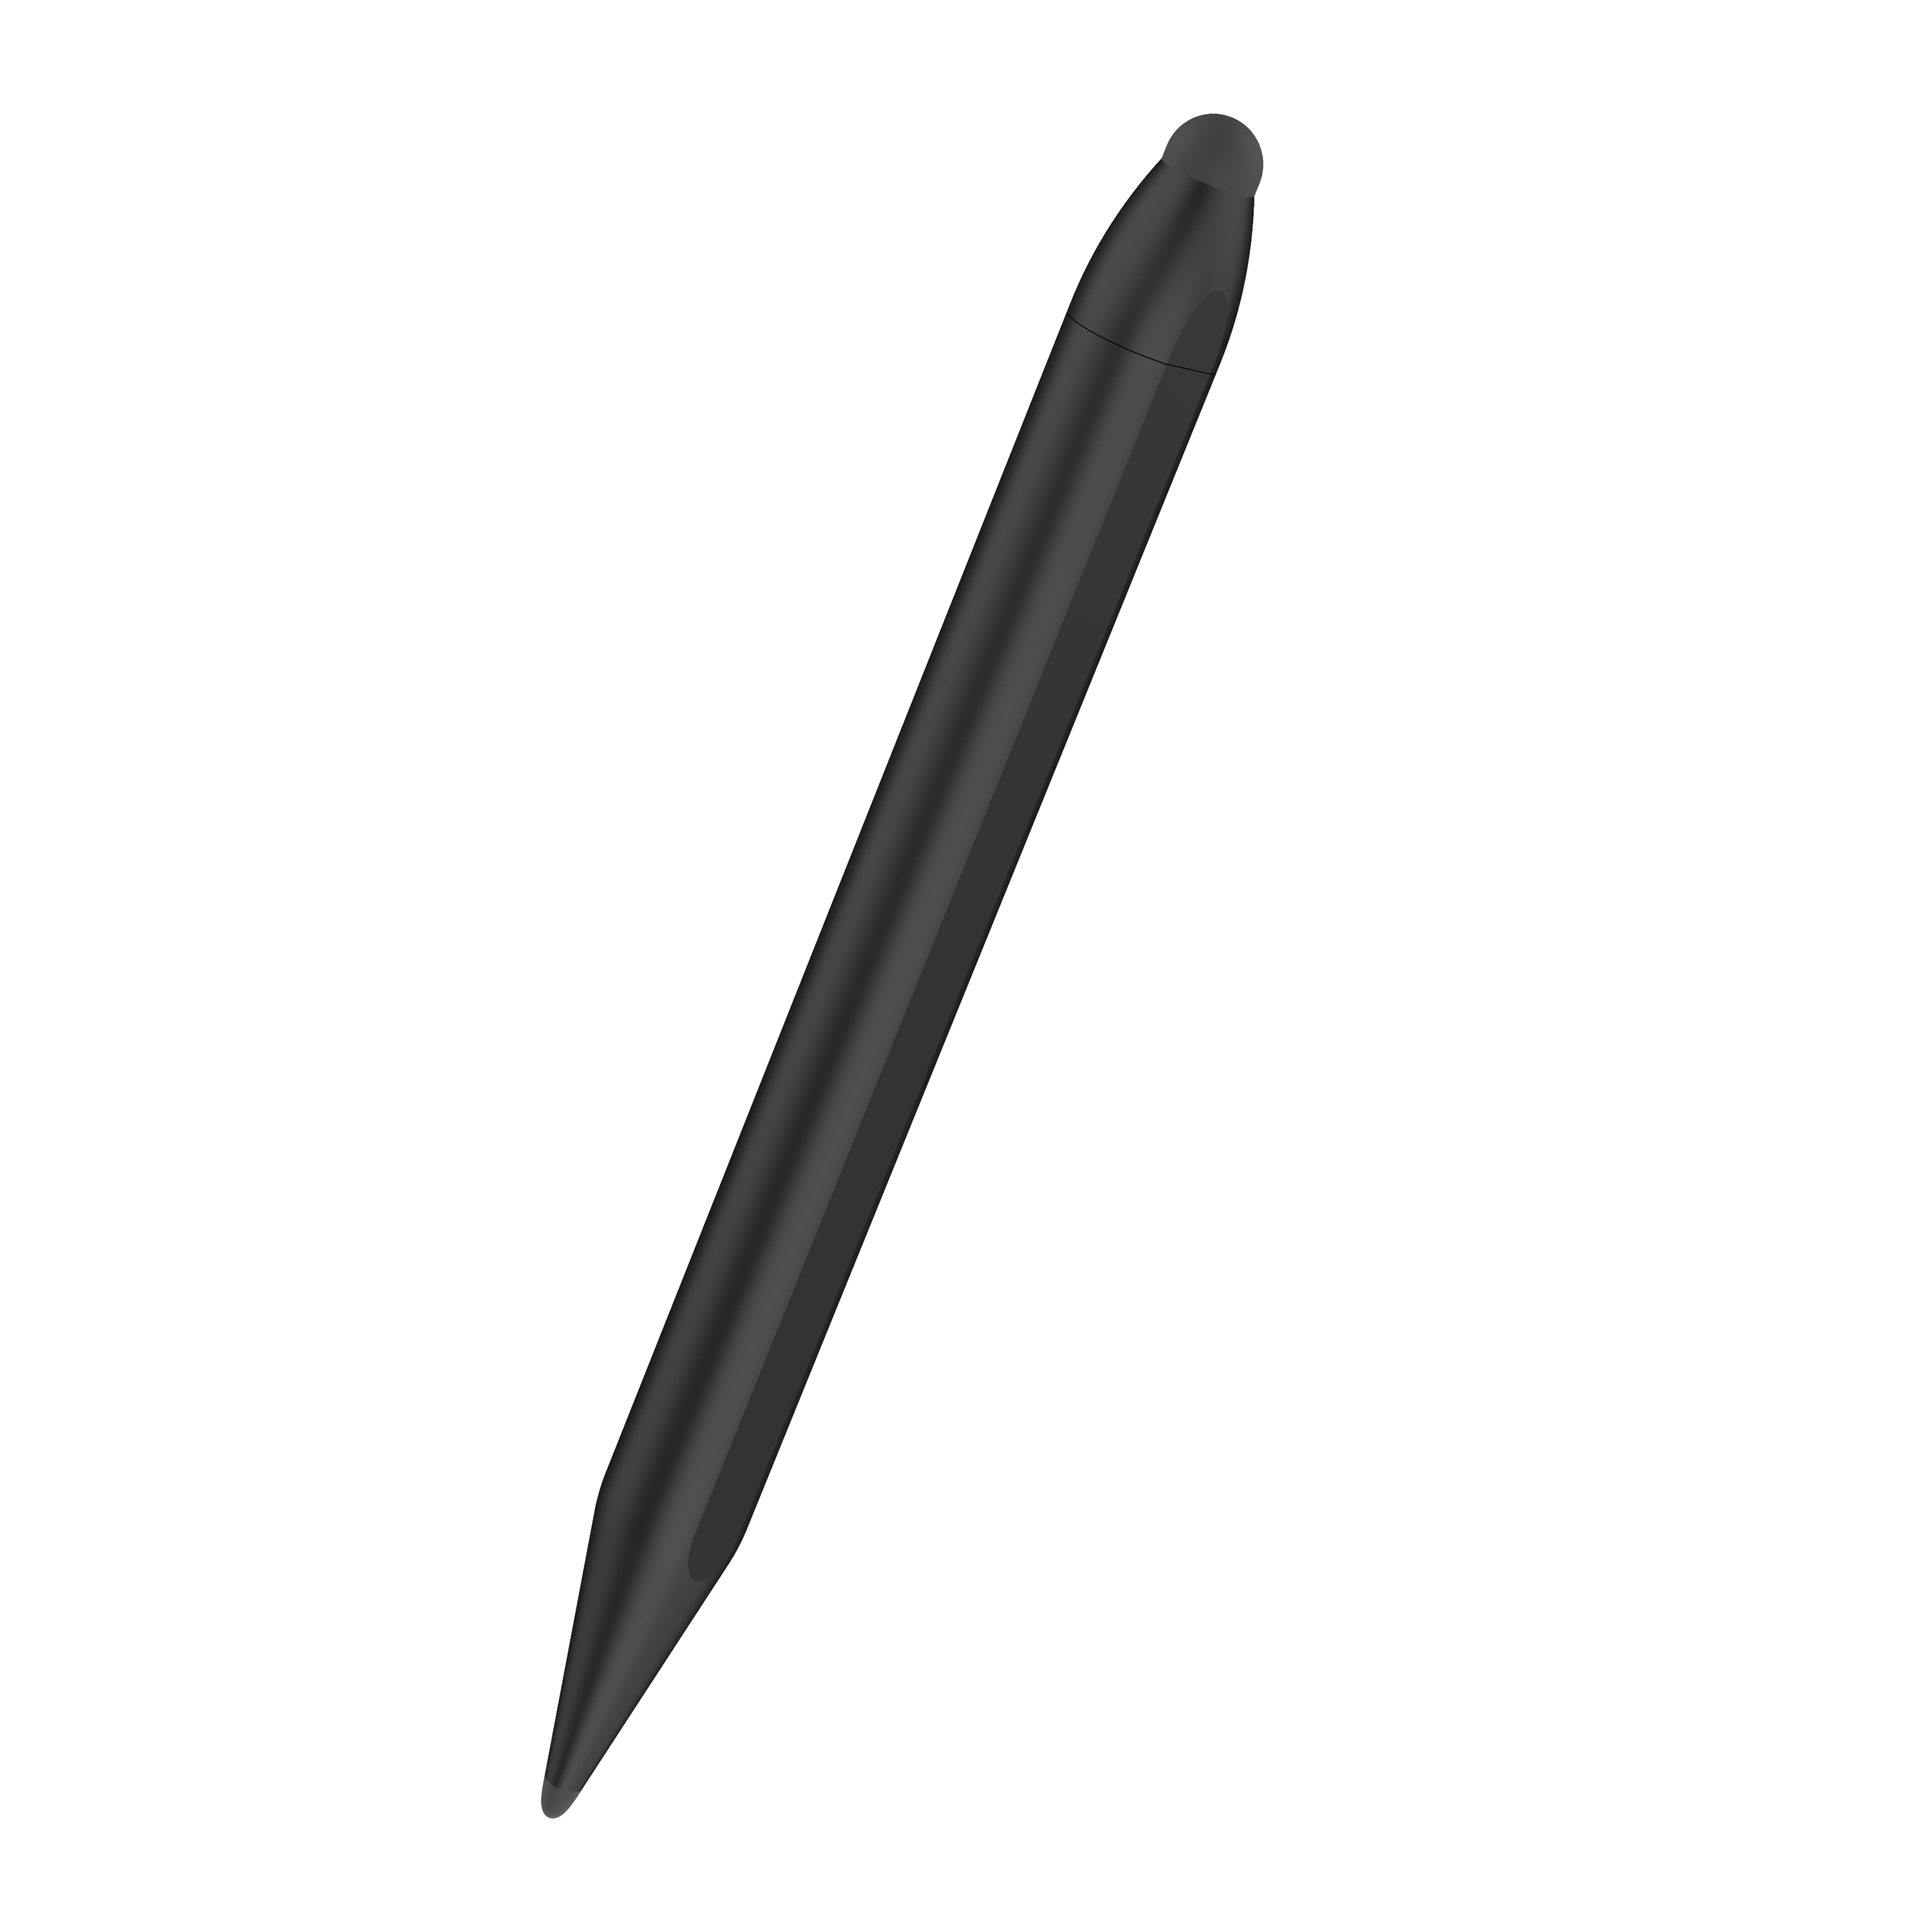 Touch stylus with soft tip